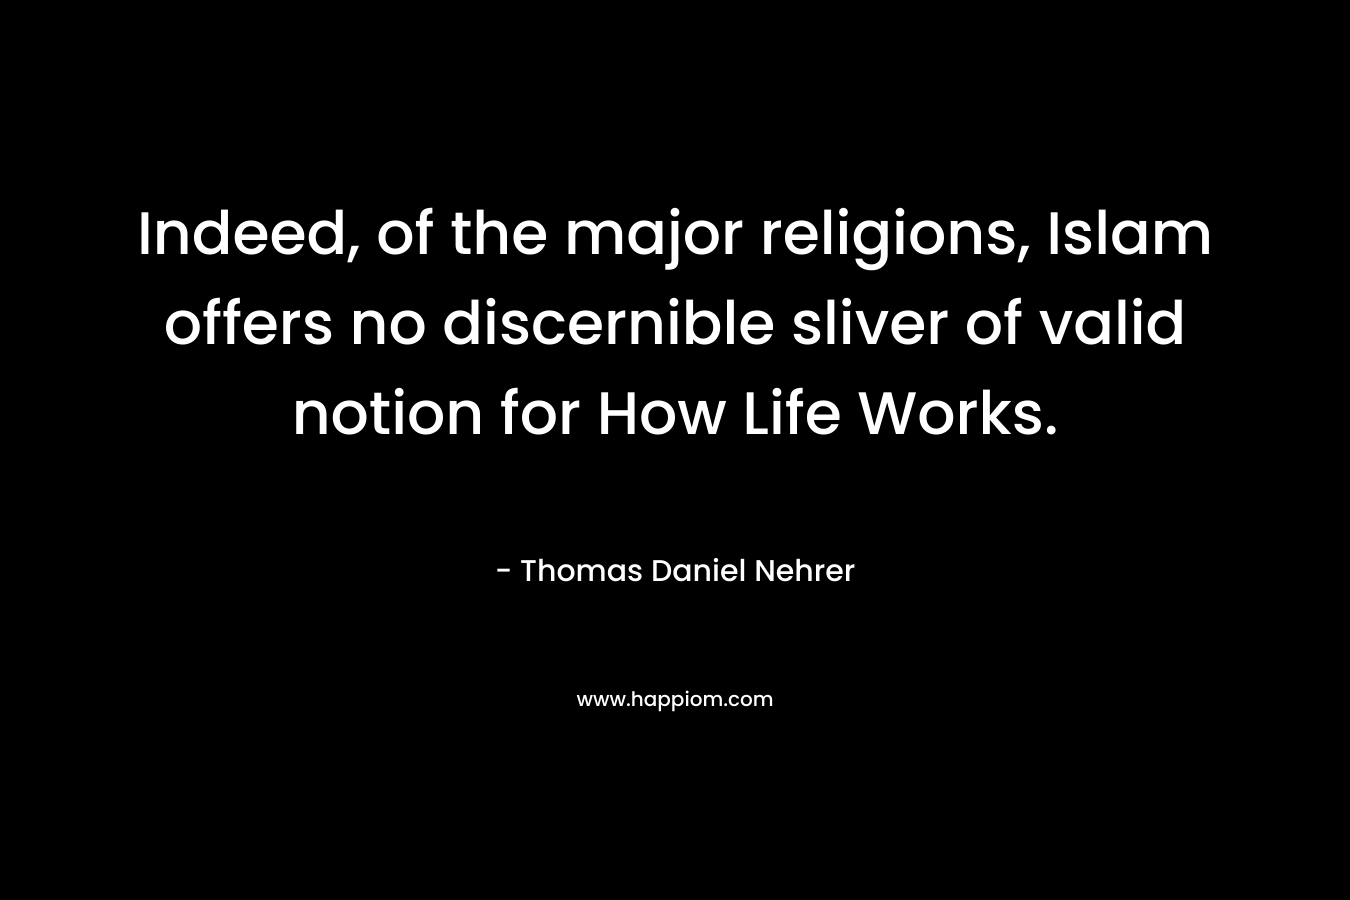 Indeed, of the major religions, Islam offers no discernible sliver of valid notion for How Life Works. – Thomas Daniel Nehrer